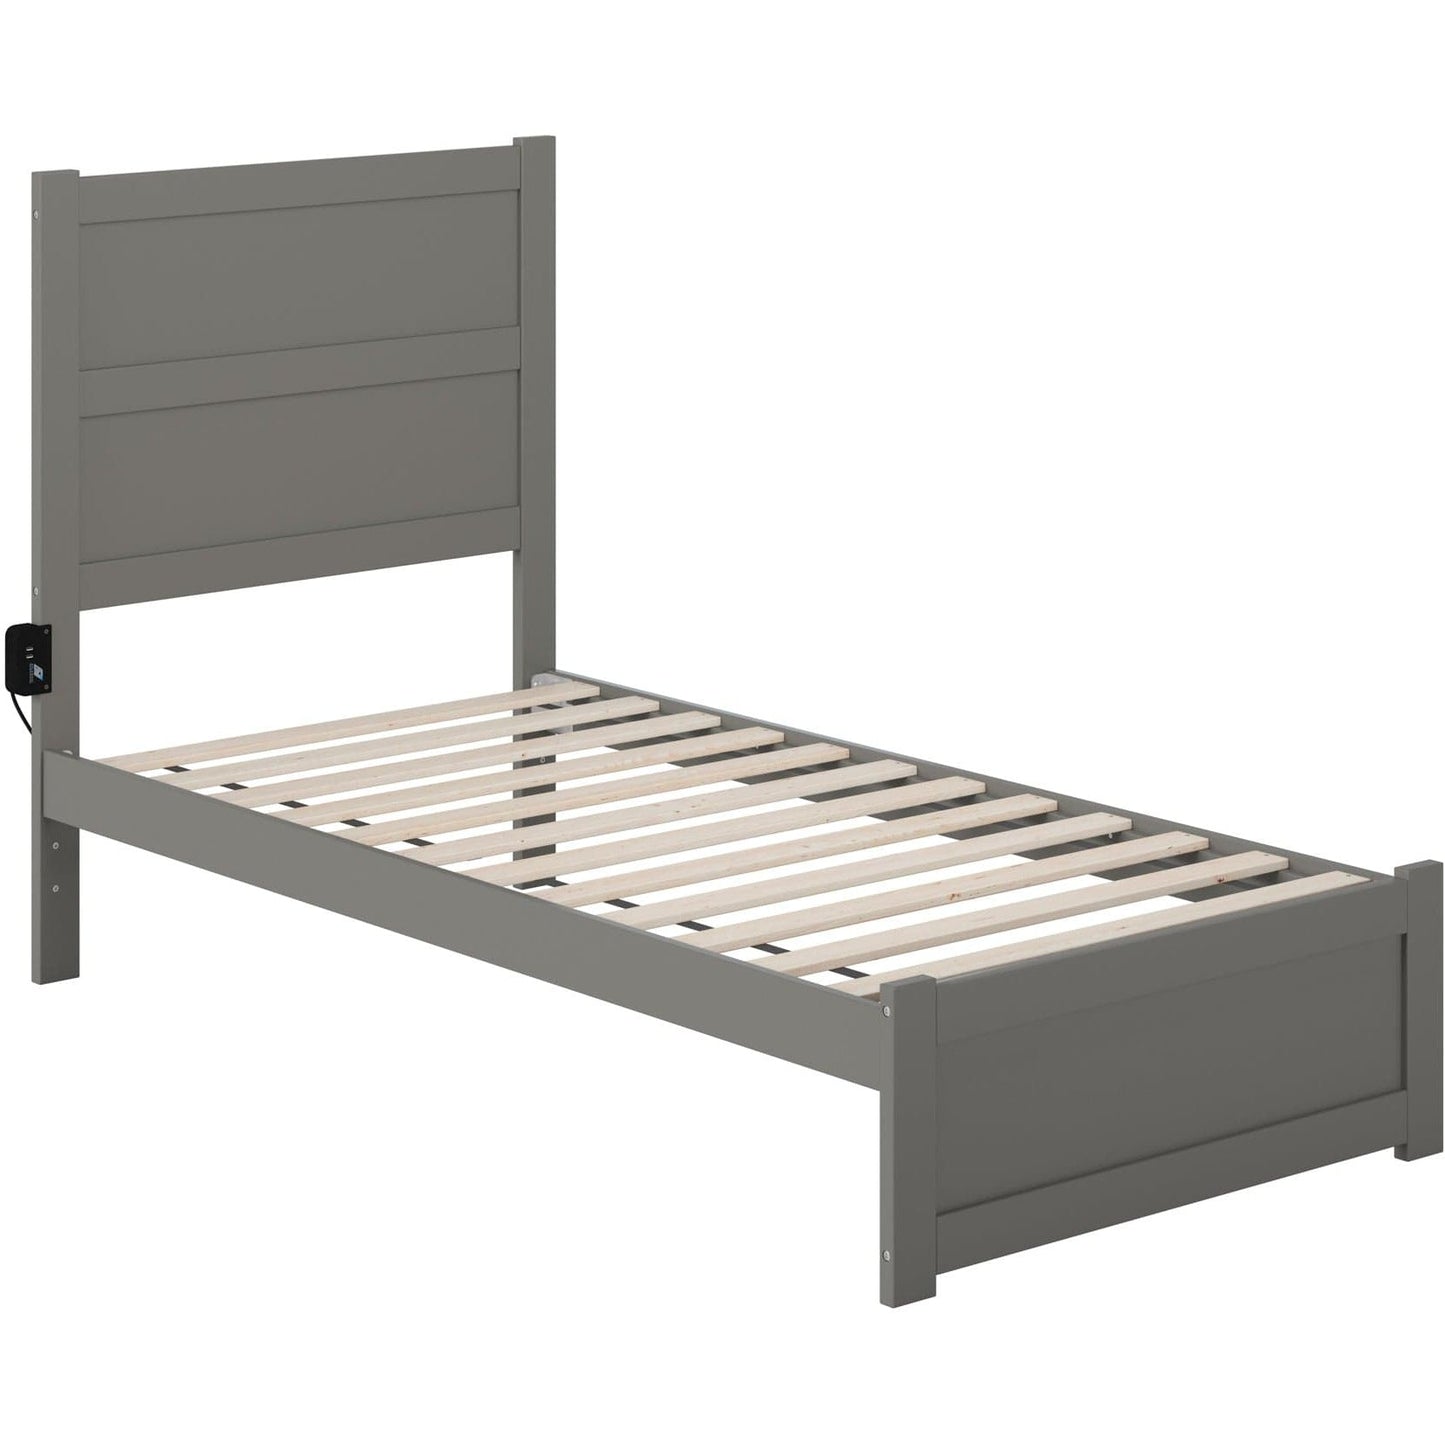 AFI Furnishings NoHo Twin Bed with Footboard in Grey AG9160029